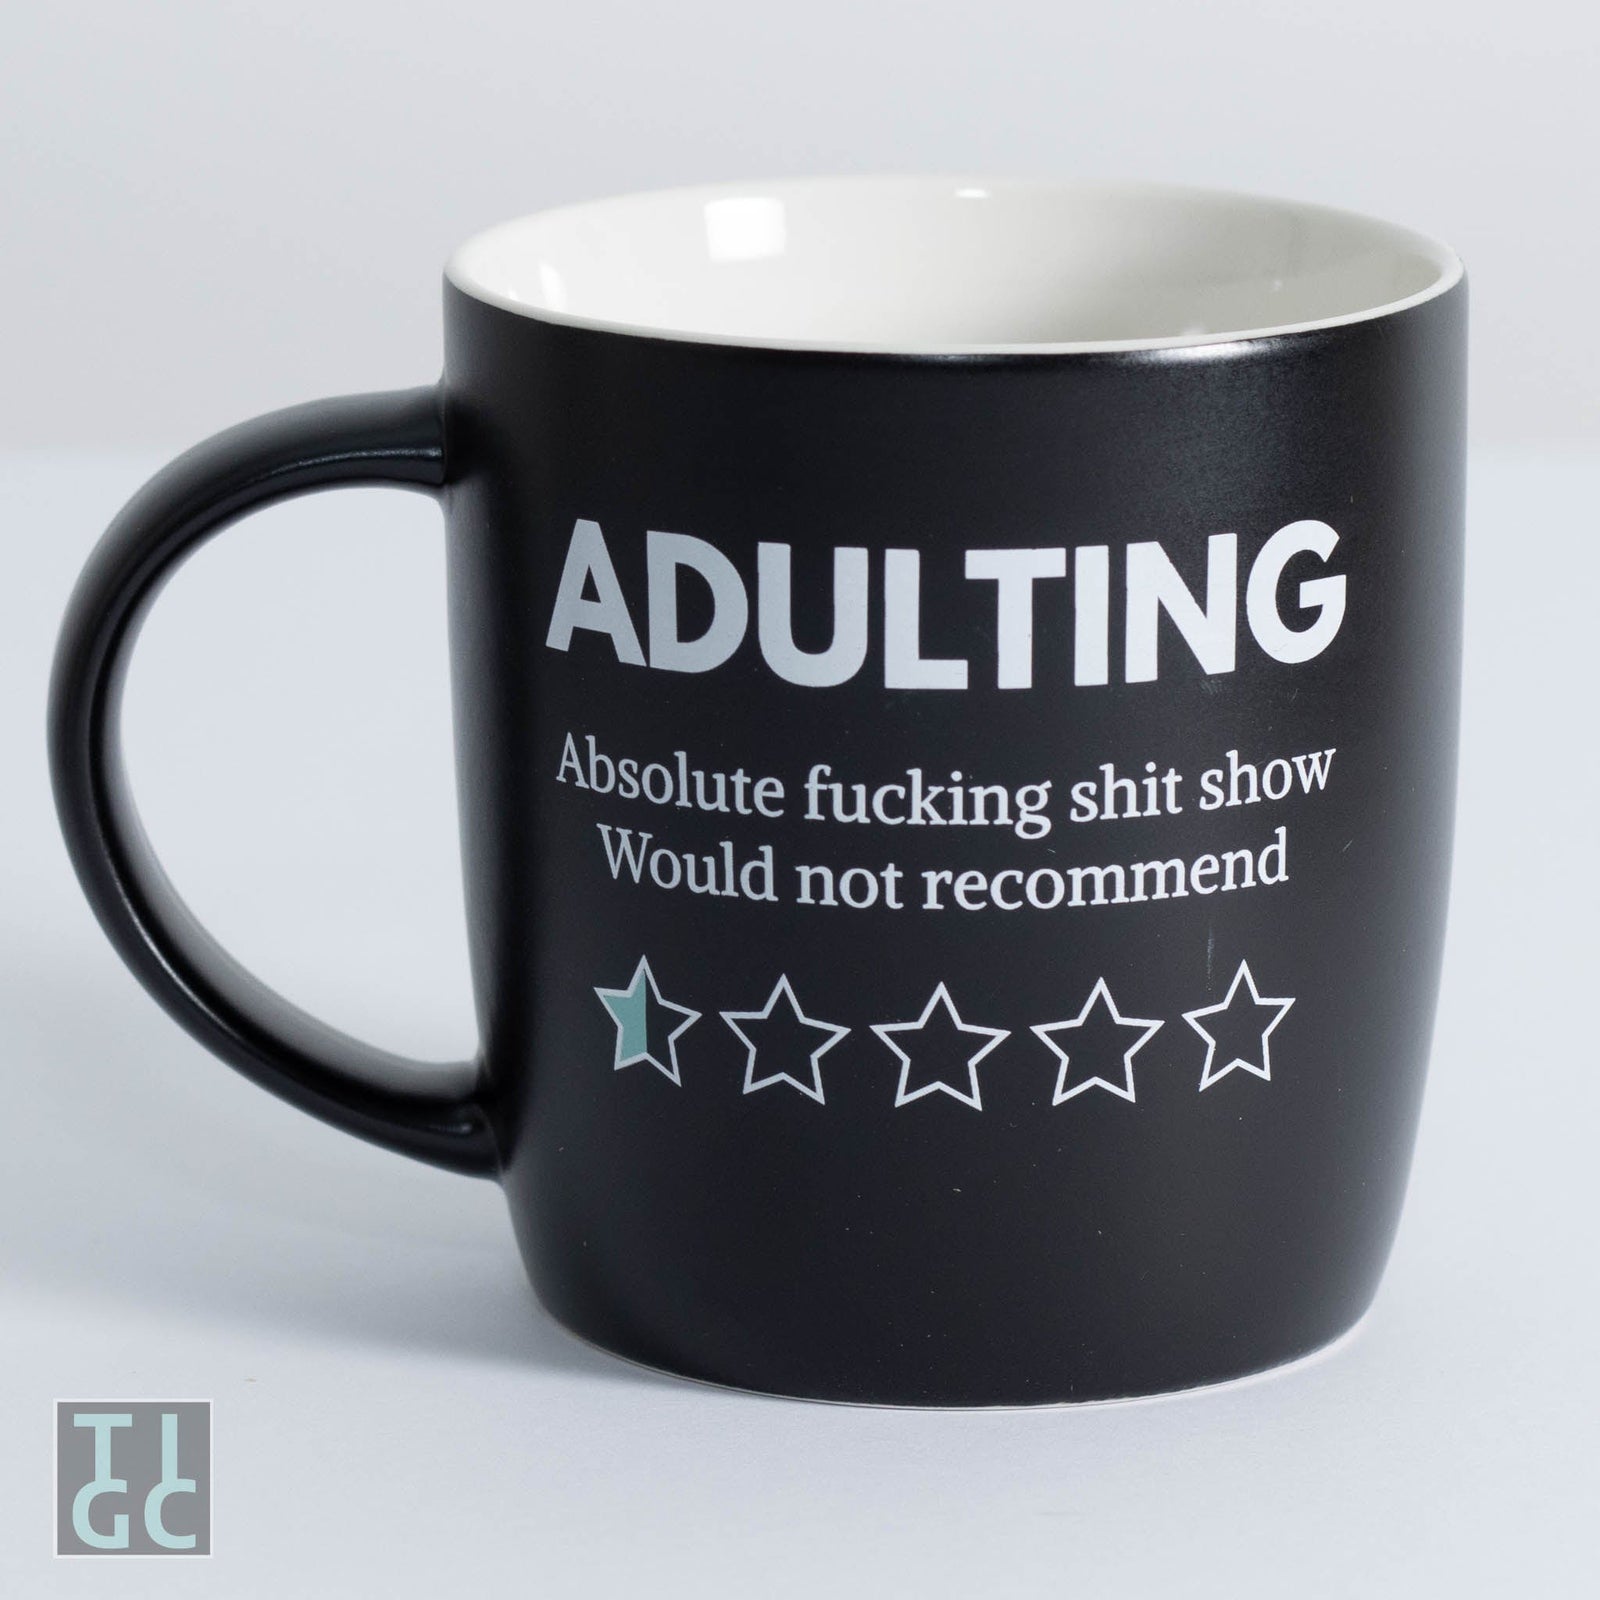 Here's Your Fucking Present That's It – large designer mug from Insulting  Gifts™